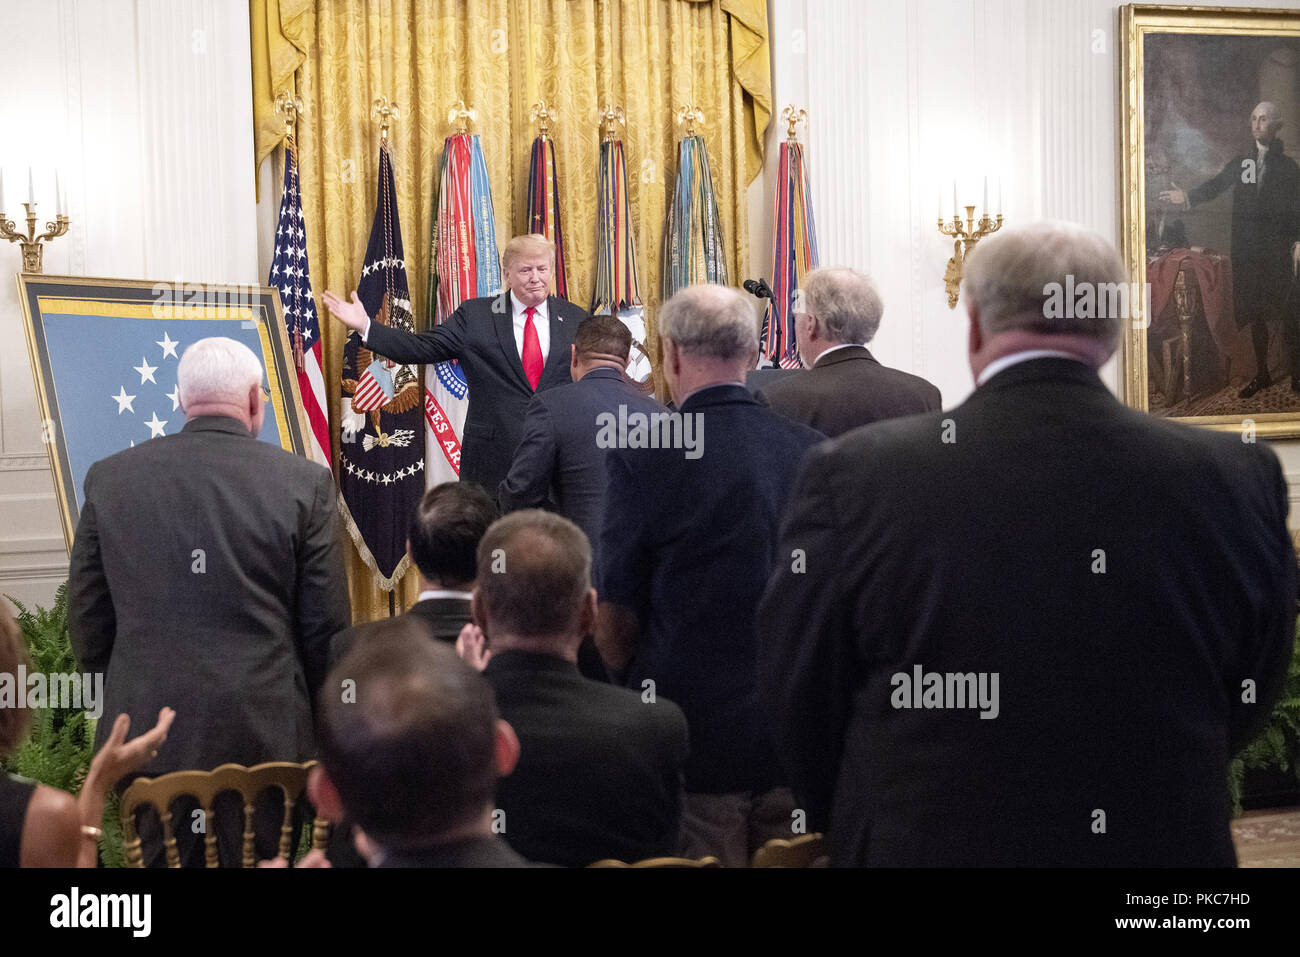 Washington, District of Columbia, USA. 12th Sep, 2018. United States President Donald J. Trump acknowledges the attendance of many Congressional Medal of Honor recipients as he makes remarks at the Congressional Medal of Honor Society Reception in the East Room of the White House in Washington, DC on Wednesday, September 12, 2018 Credit: Ron Sachs/CNP/ZUMA Wire/Alamy Live News Stock Photo